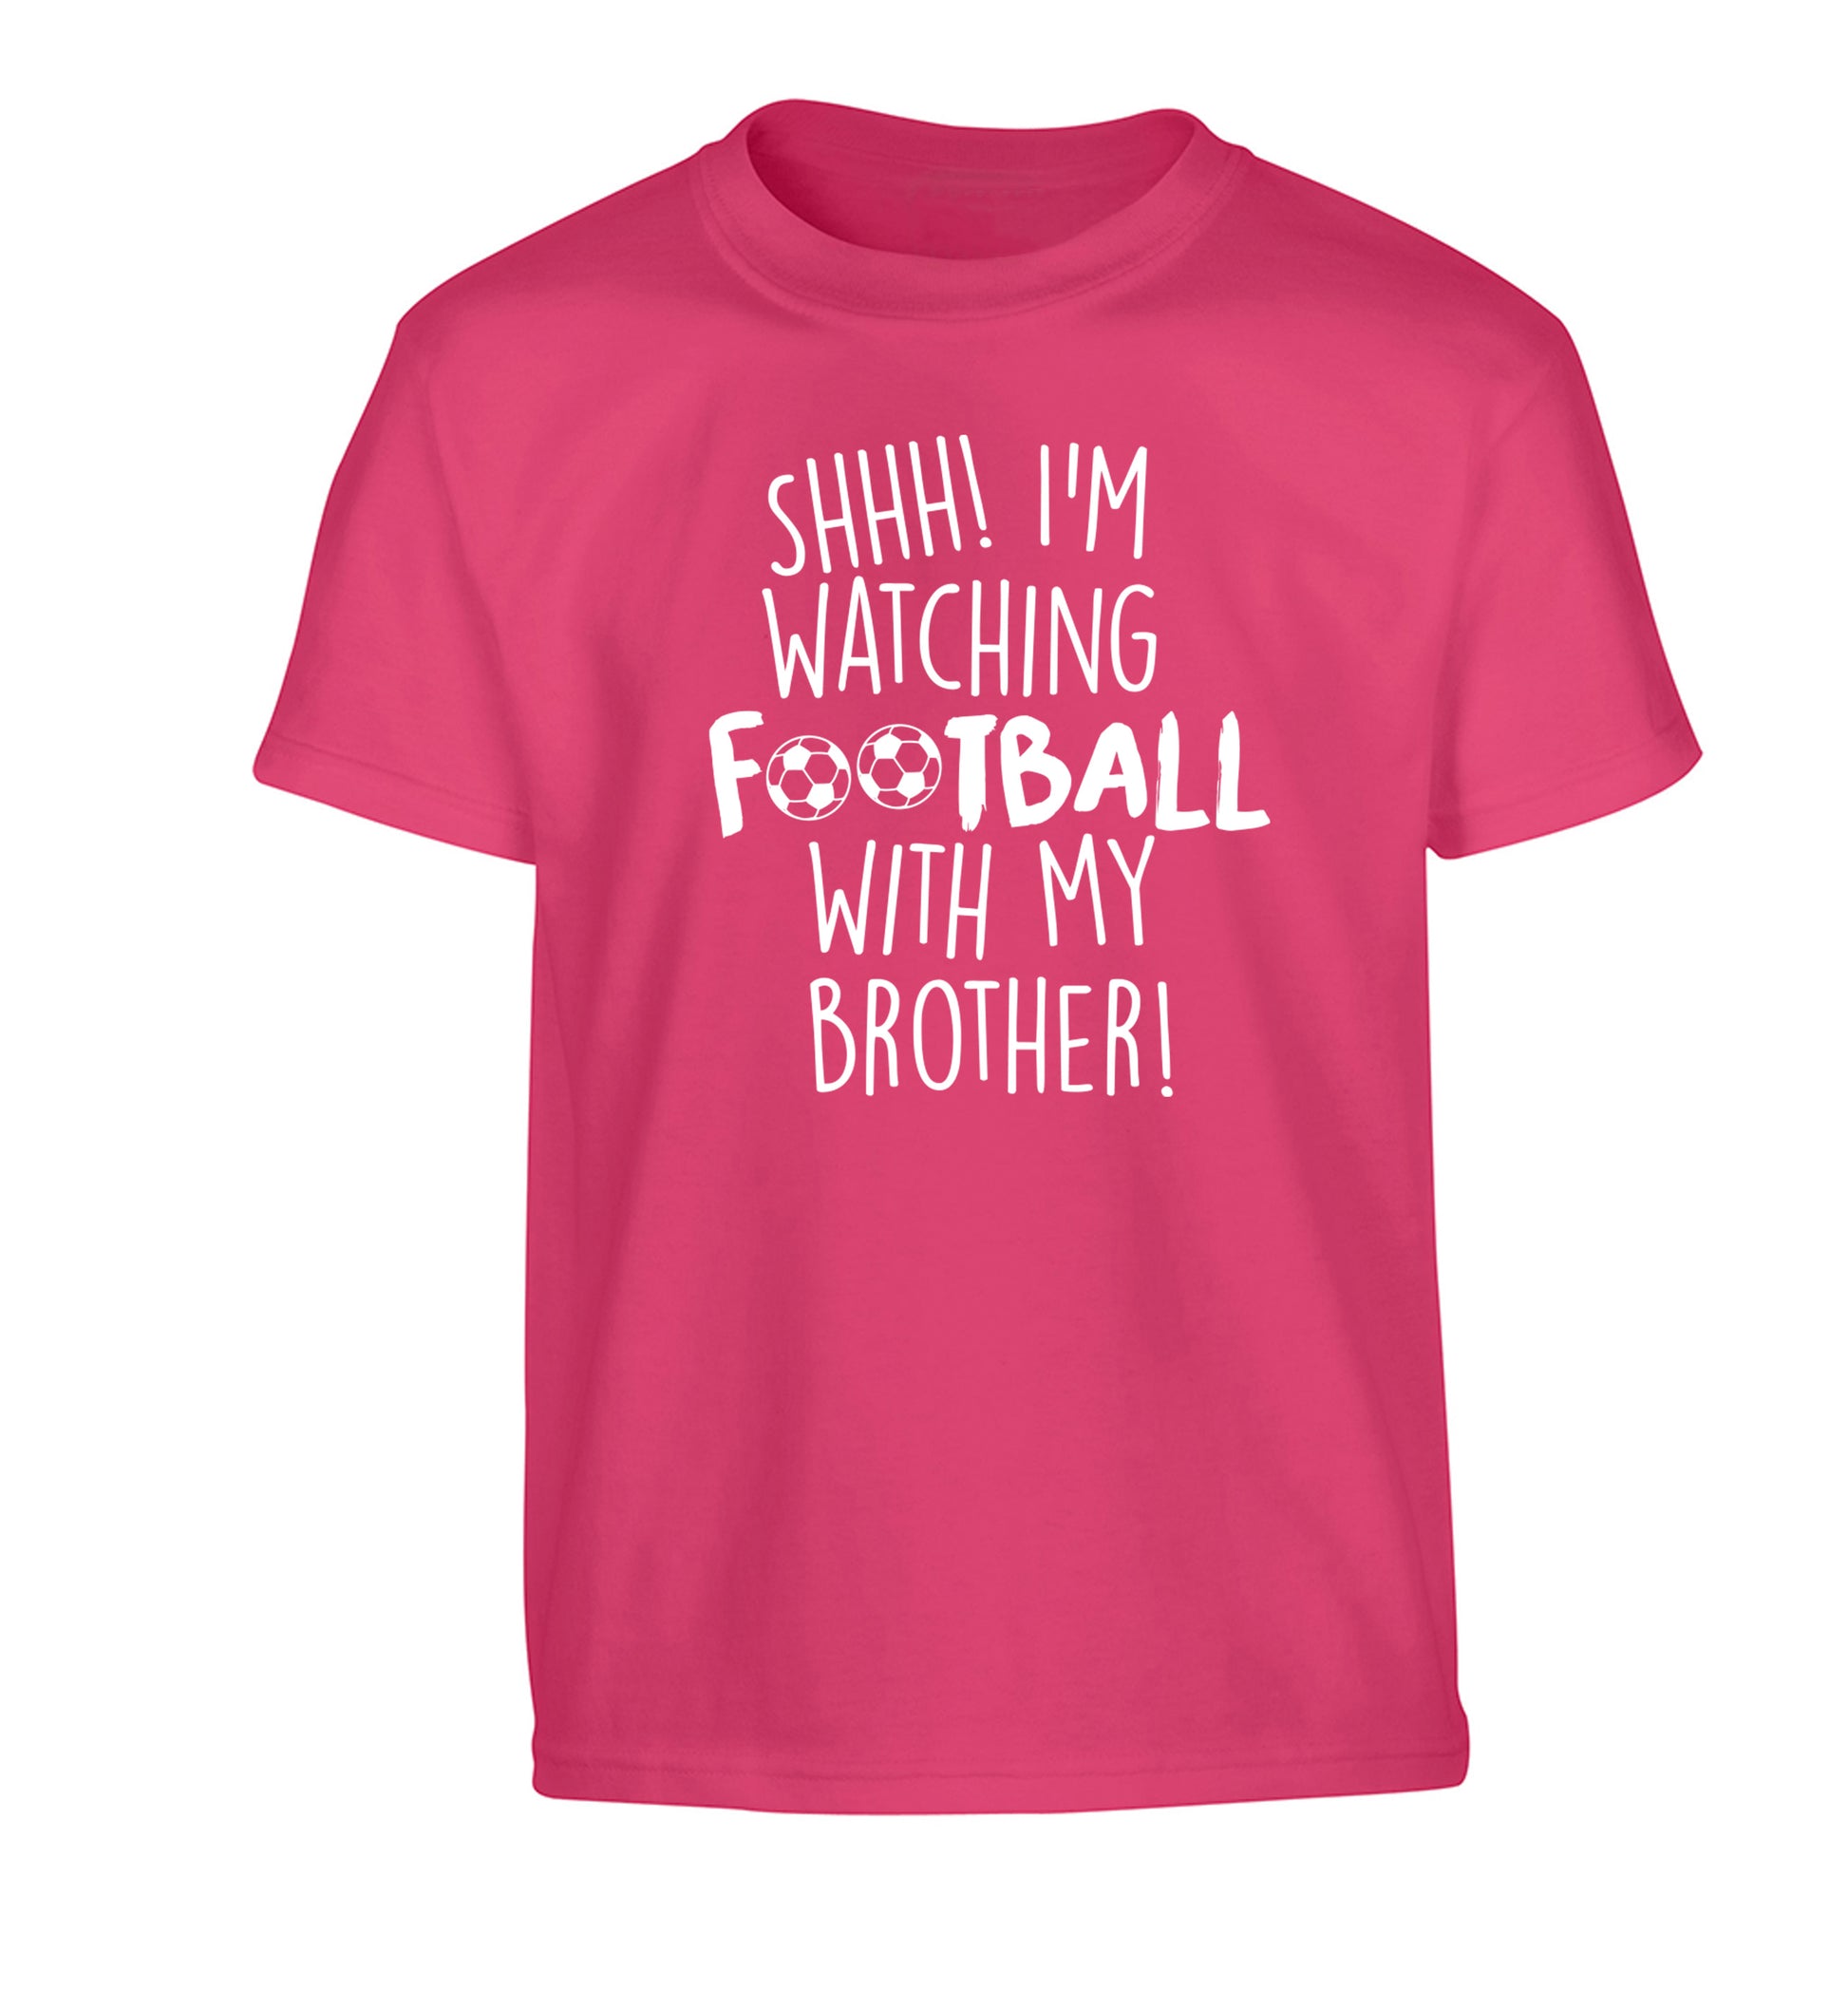 Shhh I'm watching football with my brother Children's pink Tshirt 12-14 Years